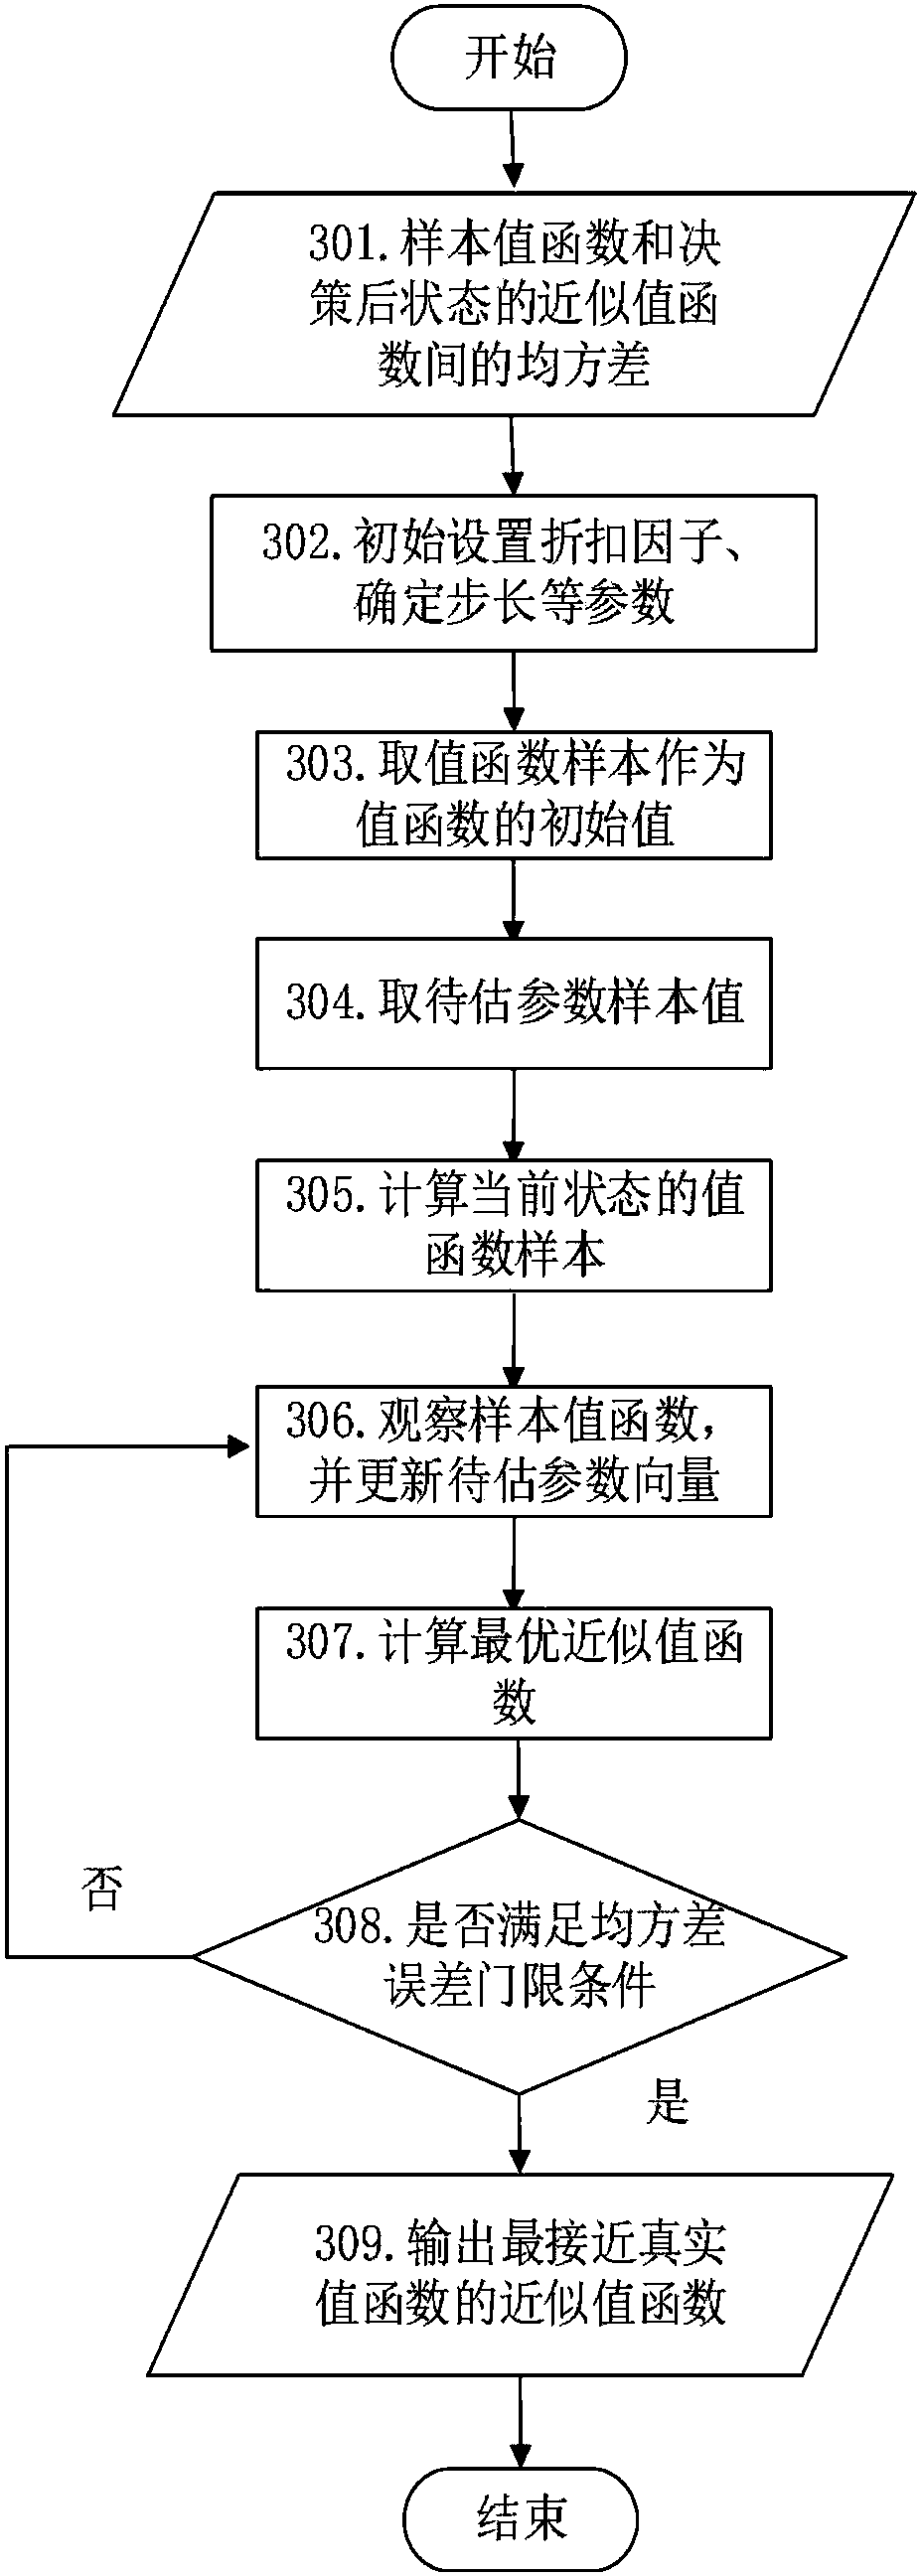 Wireless self-backhaul small base station access control and resource allocation joint optimization method